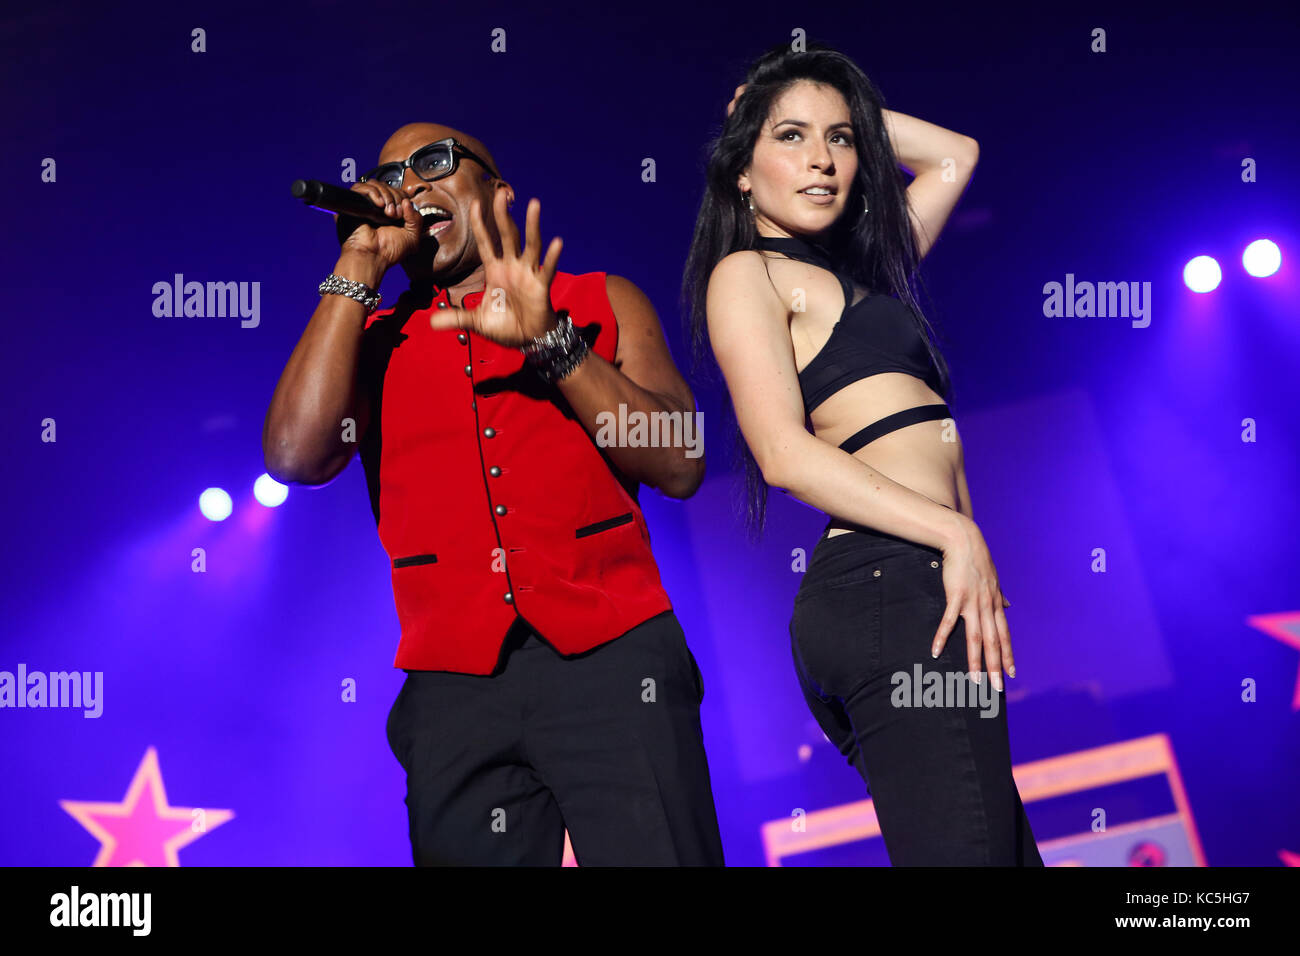 Haddaway (civil name Alexander Nestor Haddaway), Trinidadian-German singer performs his 90s Eurodance hit 'What is love' (here with female dance) at 90er Party Arena Wetzlar (party with mainly Eurodance-stars from the 90s), Rittal-Arena, Wetzlar, Germany, 30th September, 2017. Credit: Christian Lademann Stock Photo